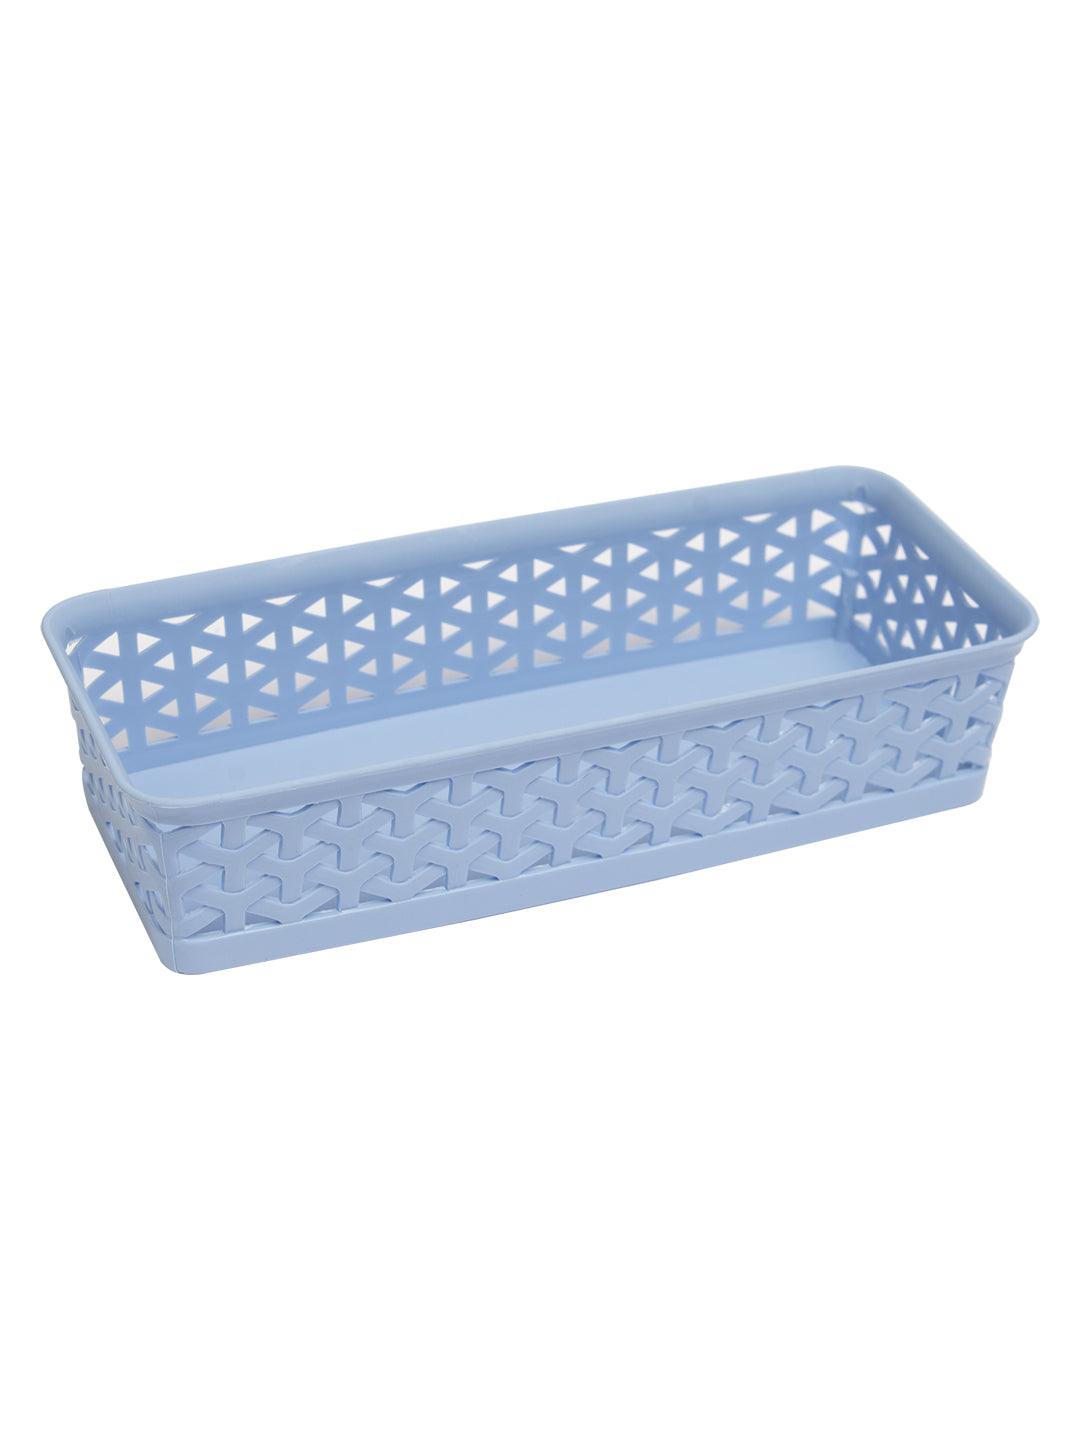 Small Plastic Baskets - Bright (12/package) 62¢ each